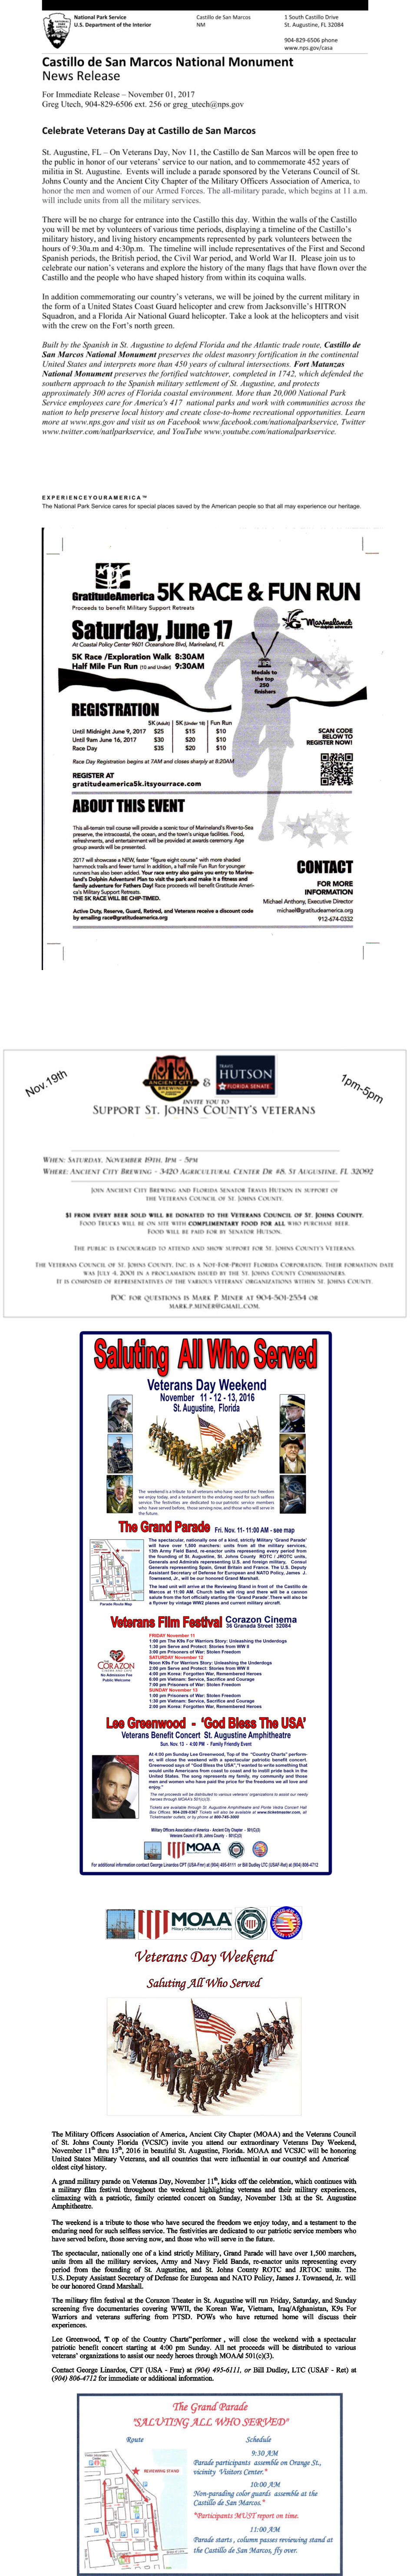 Veterans Day Weekend Saluting All Who Served The Military Officers Association of America , Ancient City Chapter (MOAA) and the Veterans Council  of St. Johns County Florida (VCSJC) invite you attend our  extraordinary  Veterans Day  Weekend , Novemb er 11 th thru  13 th , 2016 in beautiful St. Augustine, Florida .  MOAA and VC SJC will be honoring  United States Military Veterans, and all countries that were influential in our countrys and Americas  oldest citys history. A grand  military  parade  on Veterans D ay , November 11 th , kicks off the celebration ,  which  continue s with  a military film festival throughout the weekend highlighting veter ans and their military  experiences ,  climaxing with a patriotic, family oriented con cert on Sunday, November 13th at the S t. Augustine  Amphitheatre.  T he weekend is a tribute to those who have sec ured the freedom we enjoy today , and a testament to the  enduring need for  such selfless service . The festivities are dedicate d to our patriotic service members  who  have  served  befor e, those serving now, and those who will serve in the future . The  specta cular, nationally one of a kind strictly Military , Grand P arade wil l have over 1,500 marchers,  units from all the  military  services, Army and Navy Field Bands, re - enactor units repre senting every  period from the f ounding of St. Augustine , and St. Johns County ROTC and JRTOC u nits. The  U.S. Deputy Assistant Secretary of Defense for European and NATO Policy, James J. Townsend, Jr. will  be our honored Grand Marshall. The  military  film f estival at  the Corazon Theater in St. Augustine  will run  Friday , Saturday, and  Sun day  screen ing five documentaries  covering WWII,  the  Korean War, Vietnam,  Iraq/Afghanistan, K9s For  Warriors and veterans suffering from PTSD . P OWs who have returned home will discuss their experiences. Lee Greenwood, T op  of the Country C harts performer , will close the weekend with a spectacular  patriotic benefit concert starting at  4 :00 pm Sunday. All  net  proceeds will be distributed to various  veteran s organizations  to  assist our  needy  heroes through MOAAs 501(c)(3). C ontact George Linardos , CPT (USA  - Fmr)  at  (904 ) 495 - 6111 , or  Bill Dudley, LTC (USAF  - Ret) at  ( 904) 806 - 4712  for immediate or additional information.